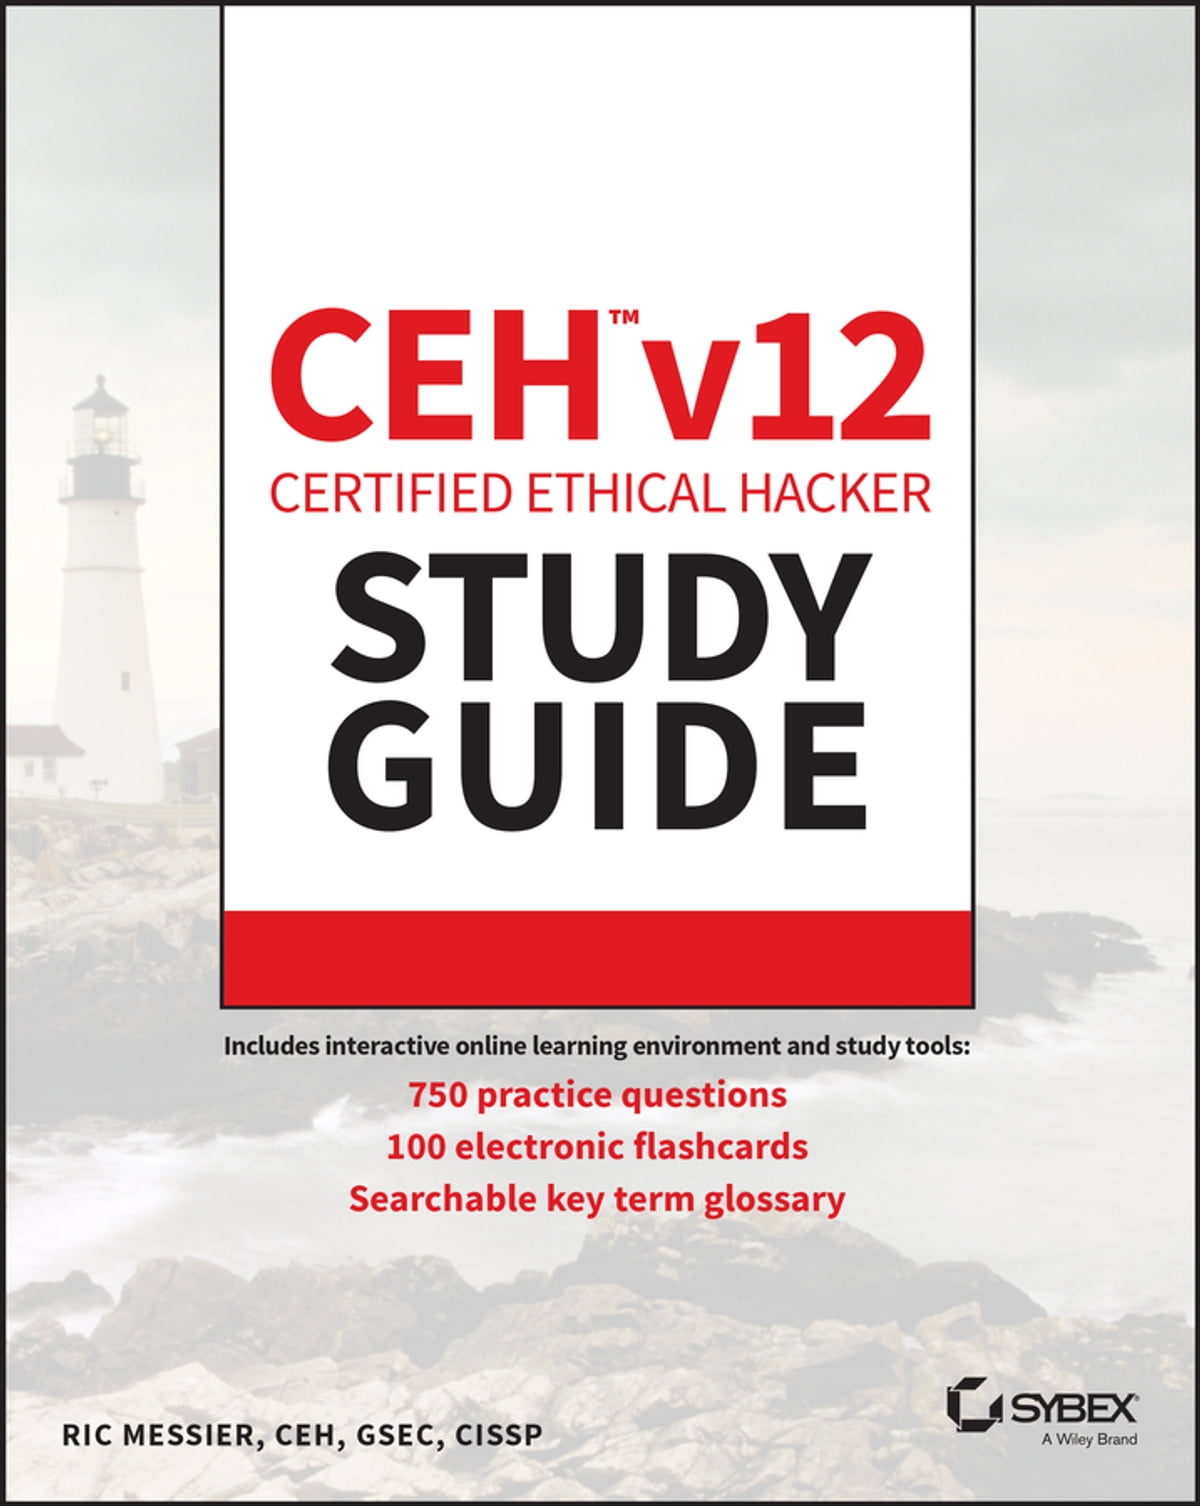 CEH v12 Certified Ethical Hacker Study Guide with 750 Practice Test Questions (Ric Messier)